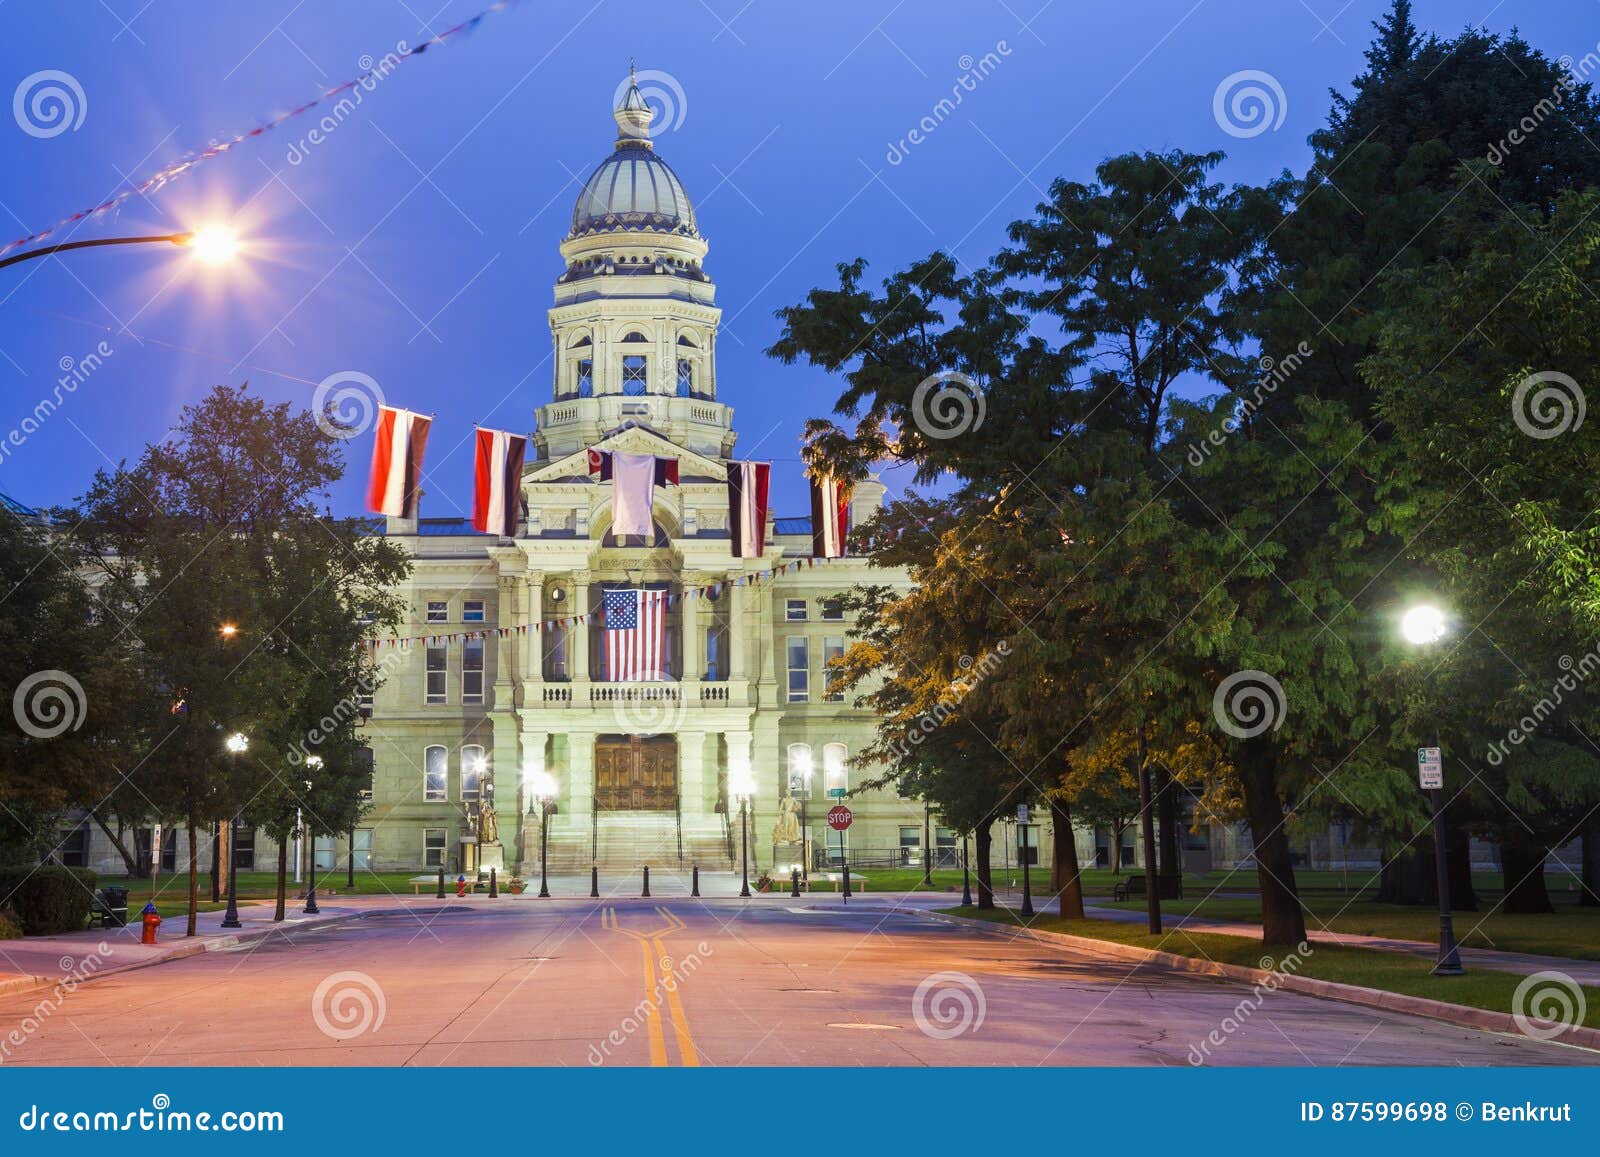 cheyenne, wyoming - state capitol building